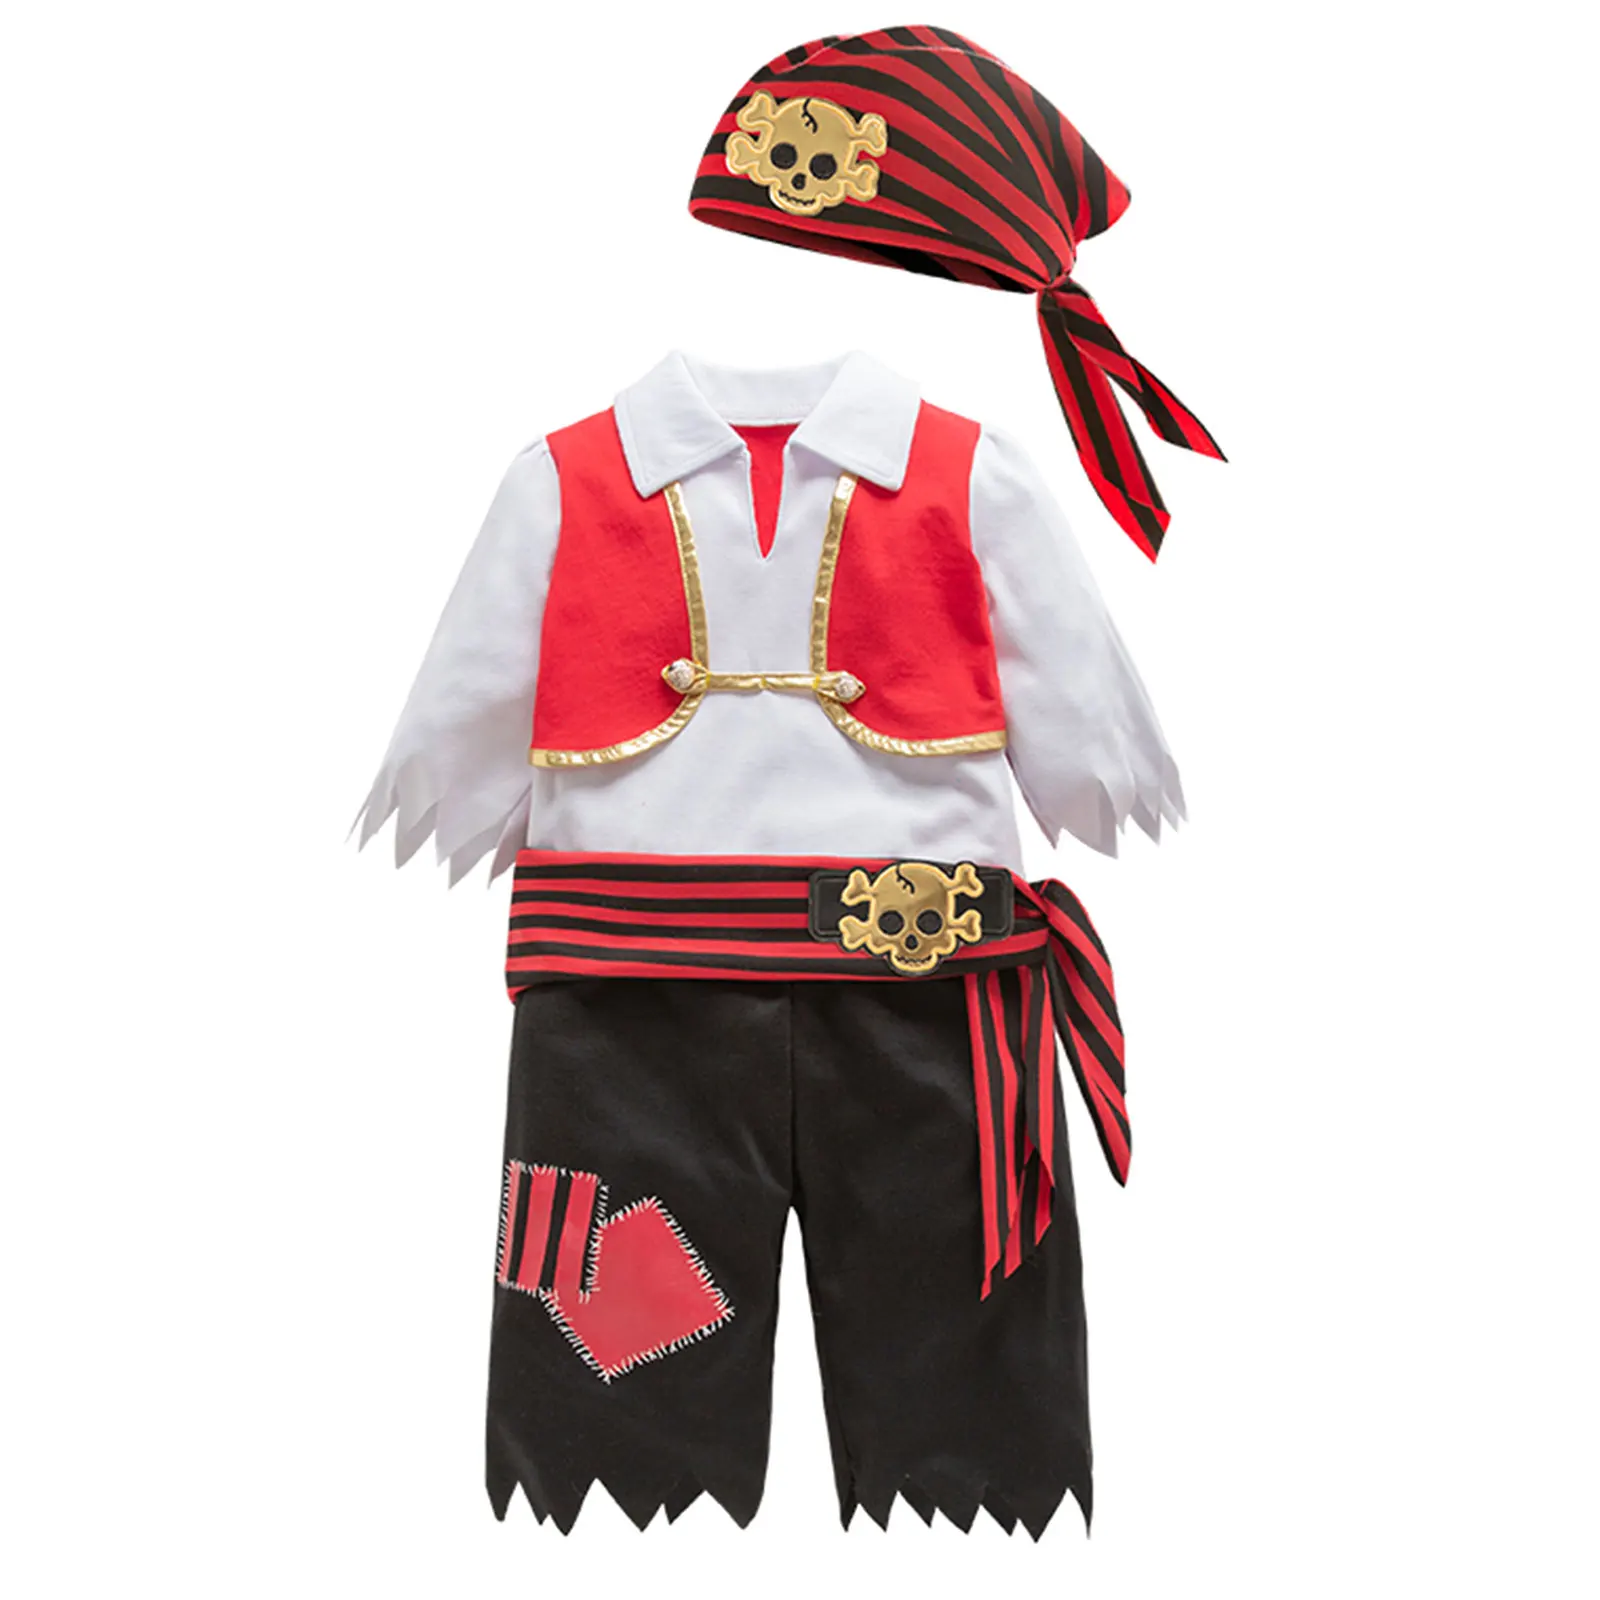 

Kids Boys Cosplay Pirate Costume for Halloween Carnival Party Waistband+Head Scarf+Vest Tops+Trousers Pants Set Fancy Dress Up